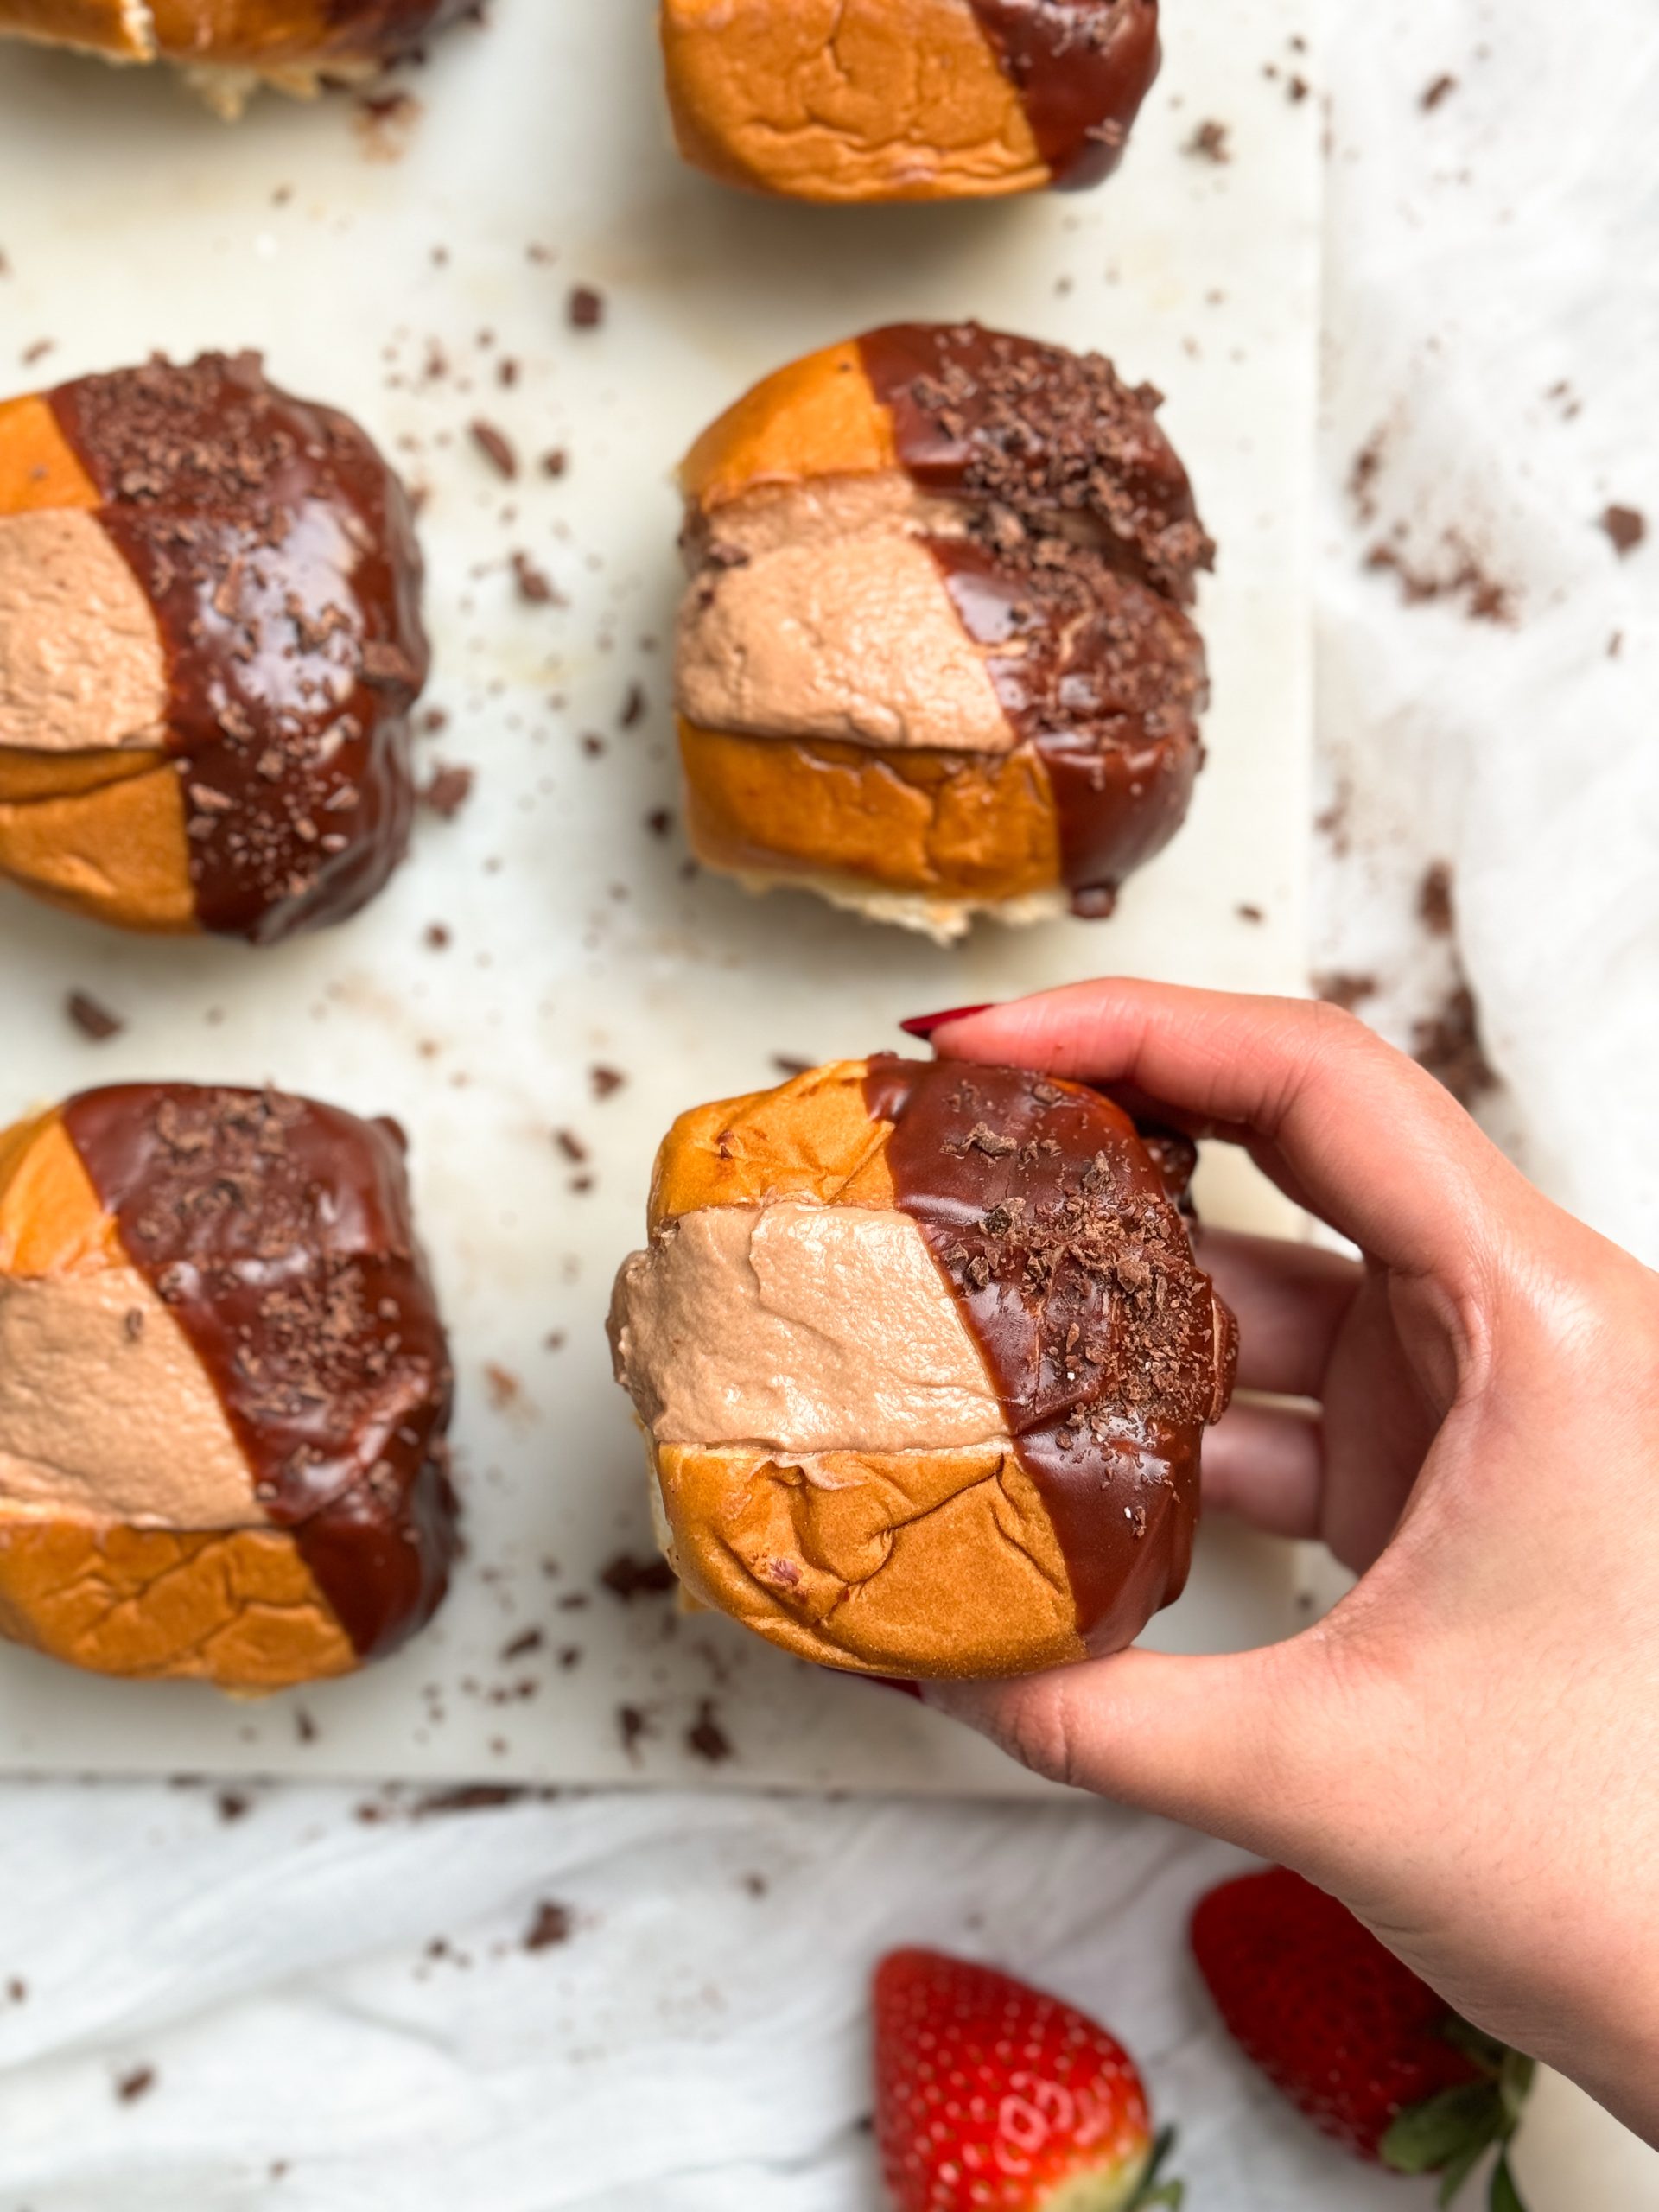 close up of chocolate cream buns on a marble serving board with a hand lifting one., the buns are dipped in a shiny chocolate glaze on the side